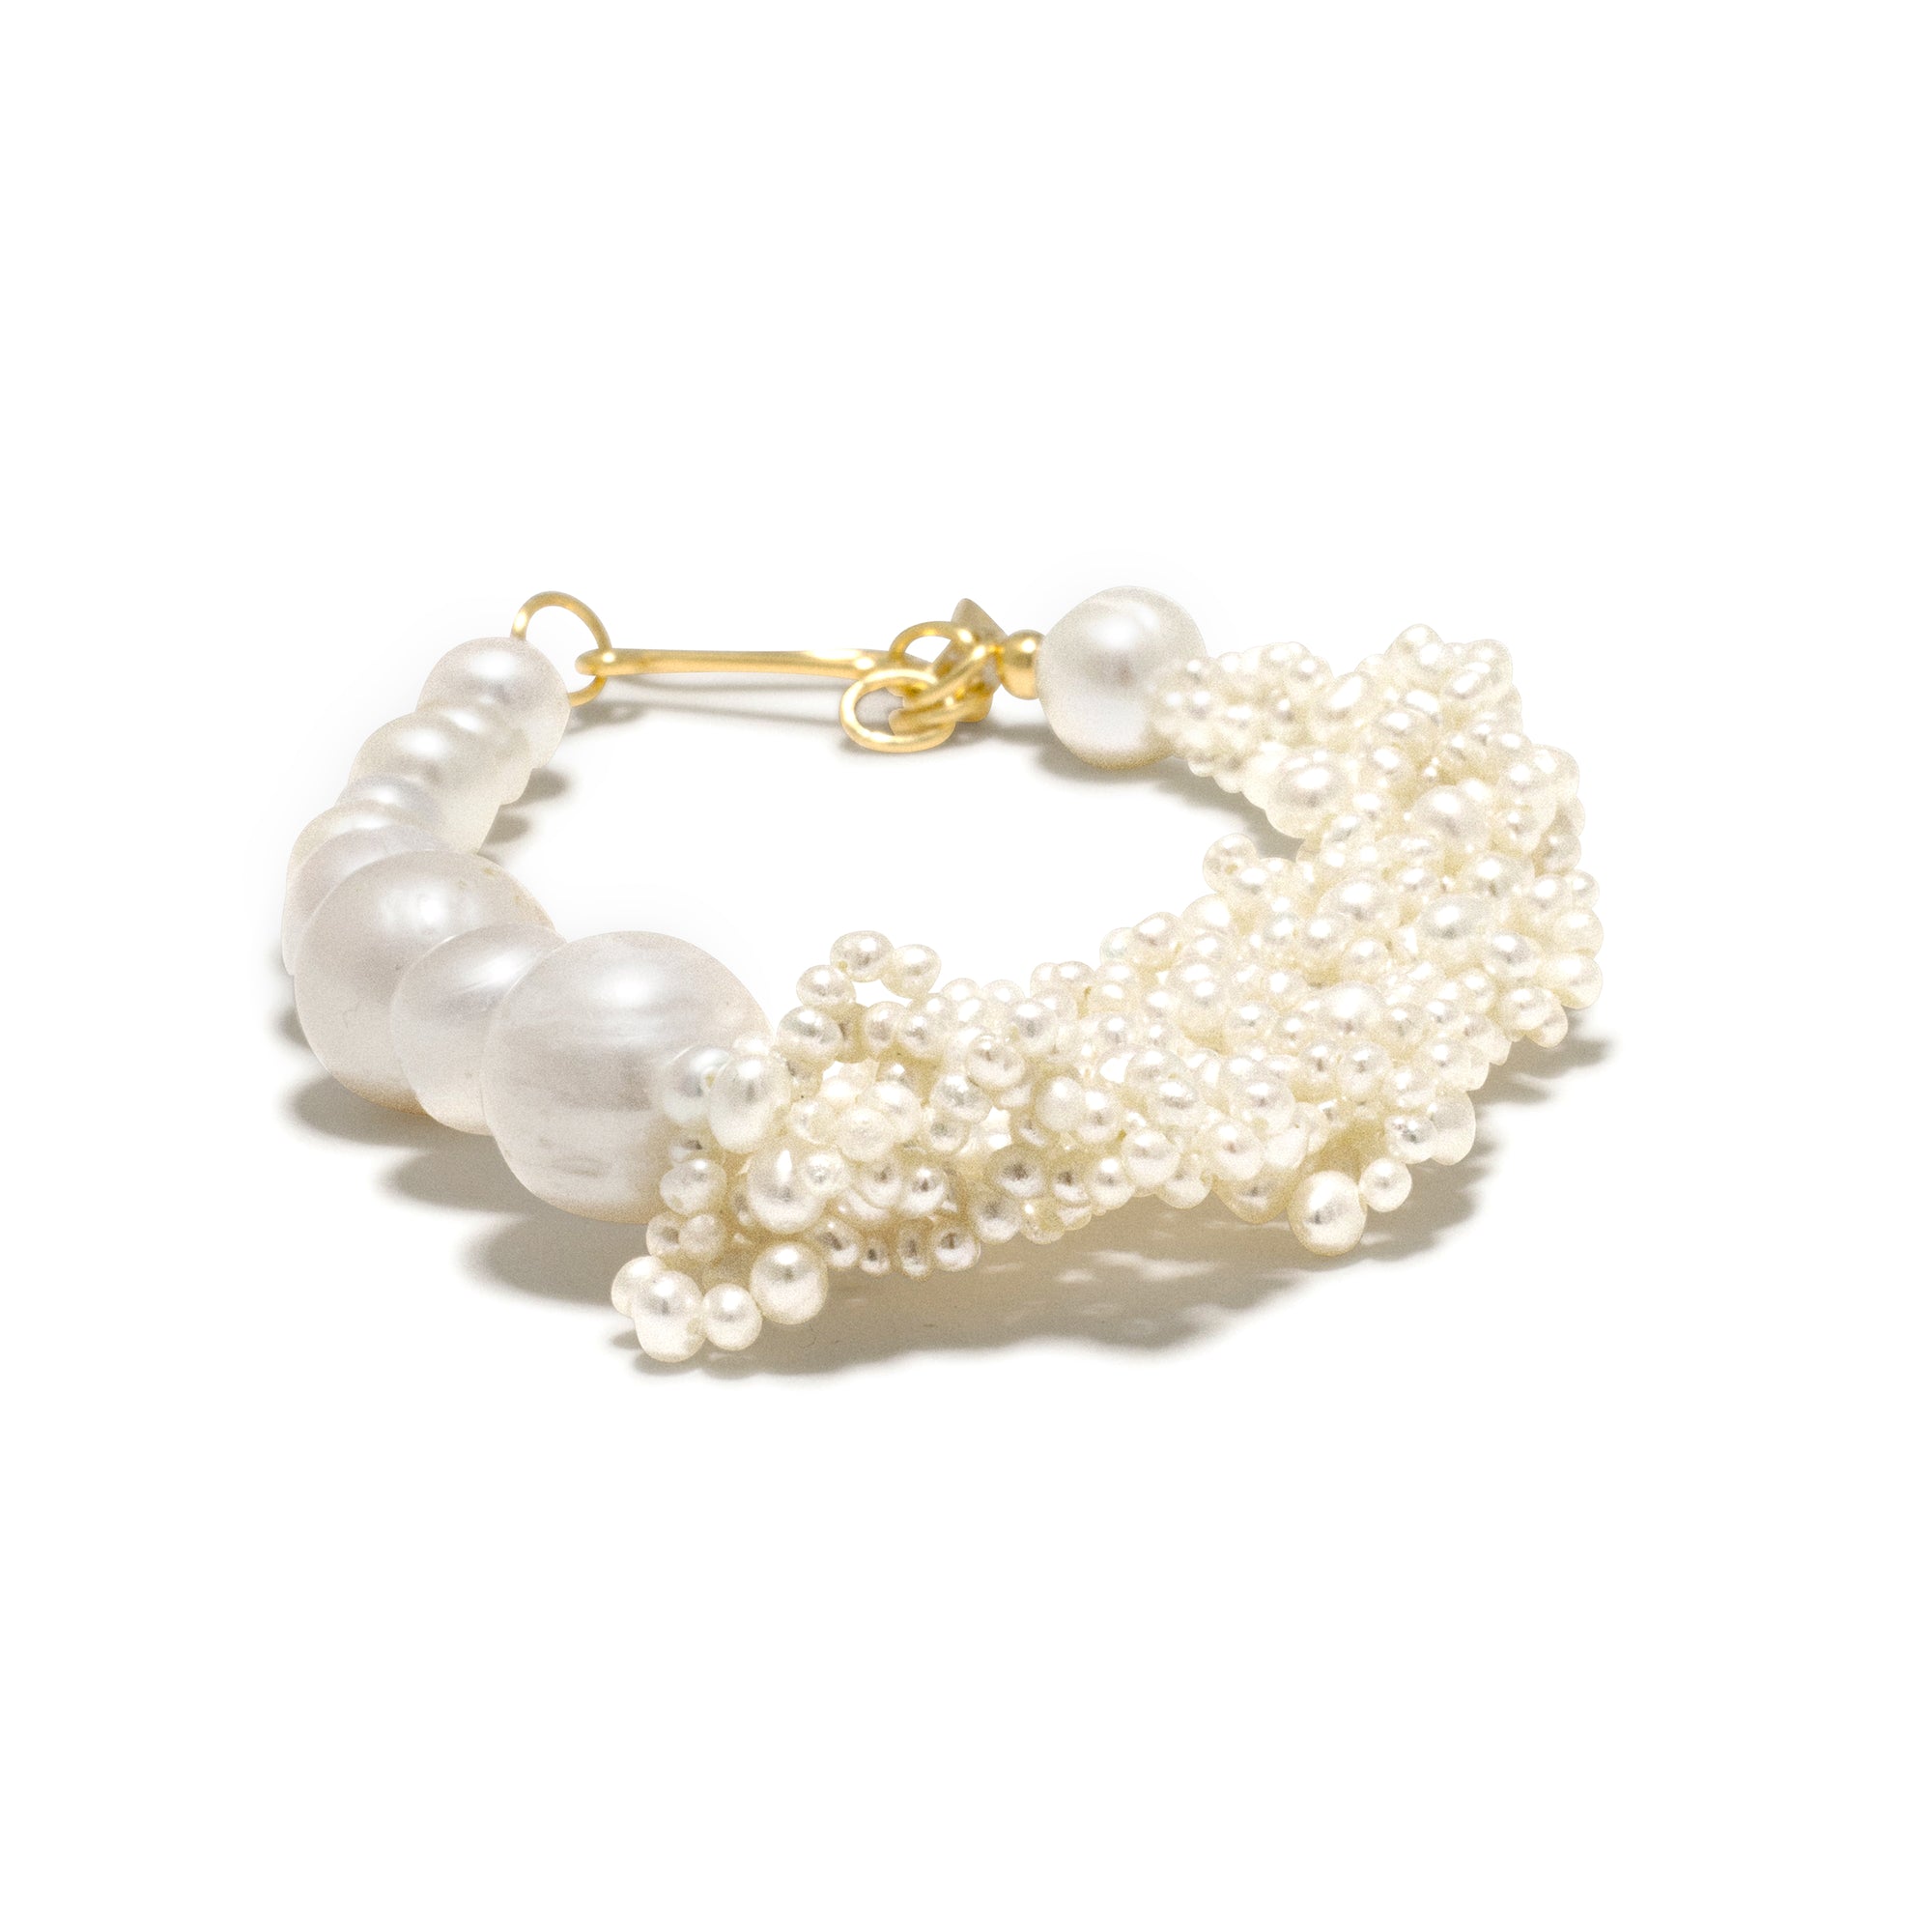 Completedworks - Women's Parade of Possibilities Bracelet - (Pearl) view 1